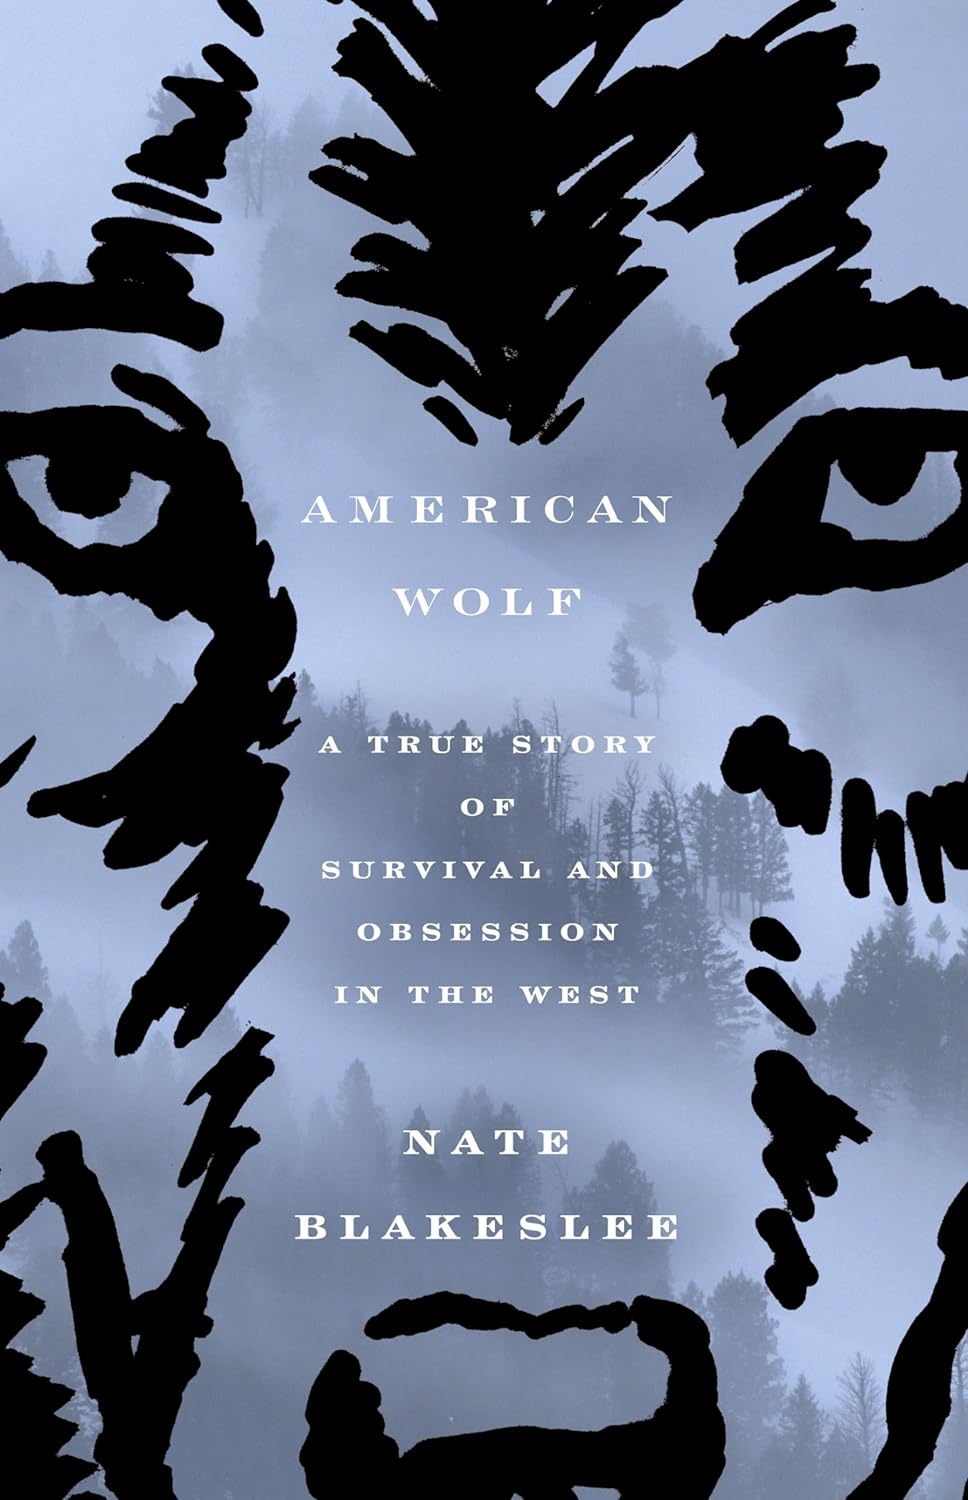 American Wolf: A True Story of Survival and Obsession in the West, by Nate Blakeslee